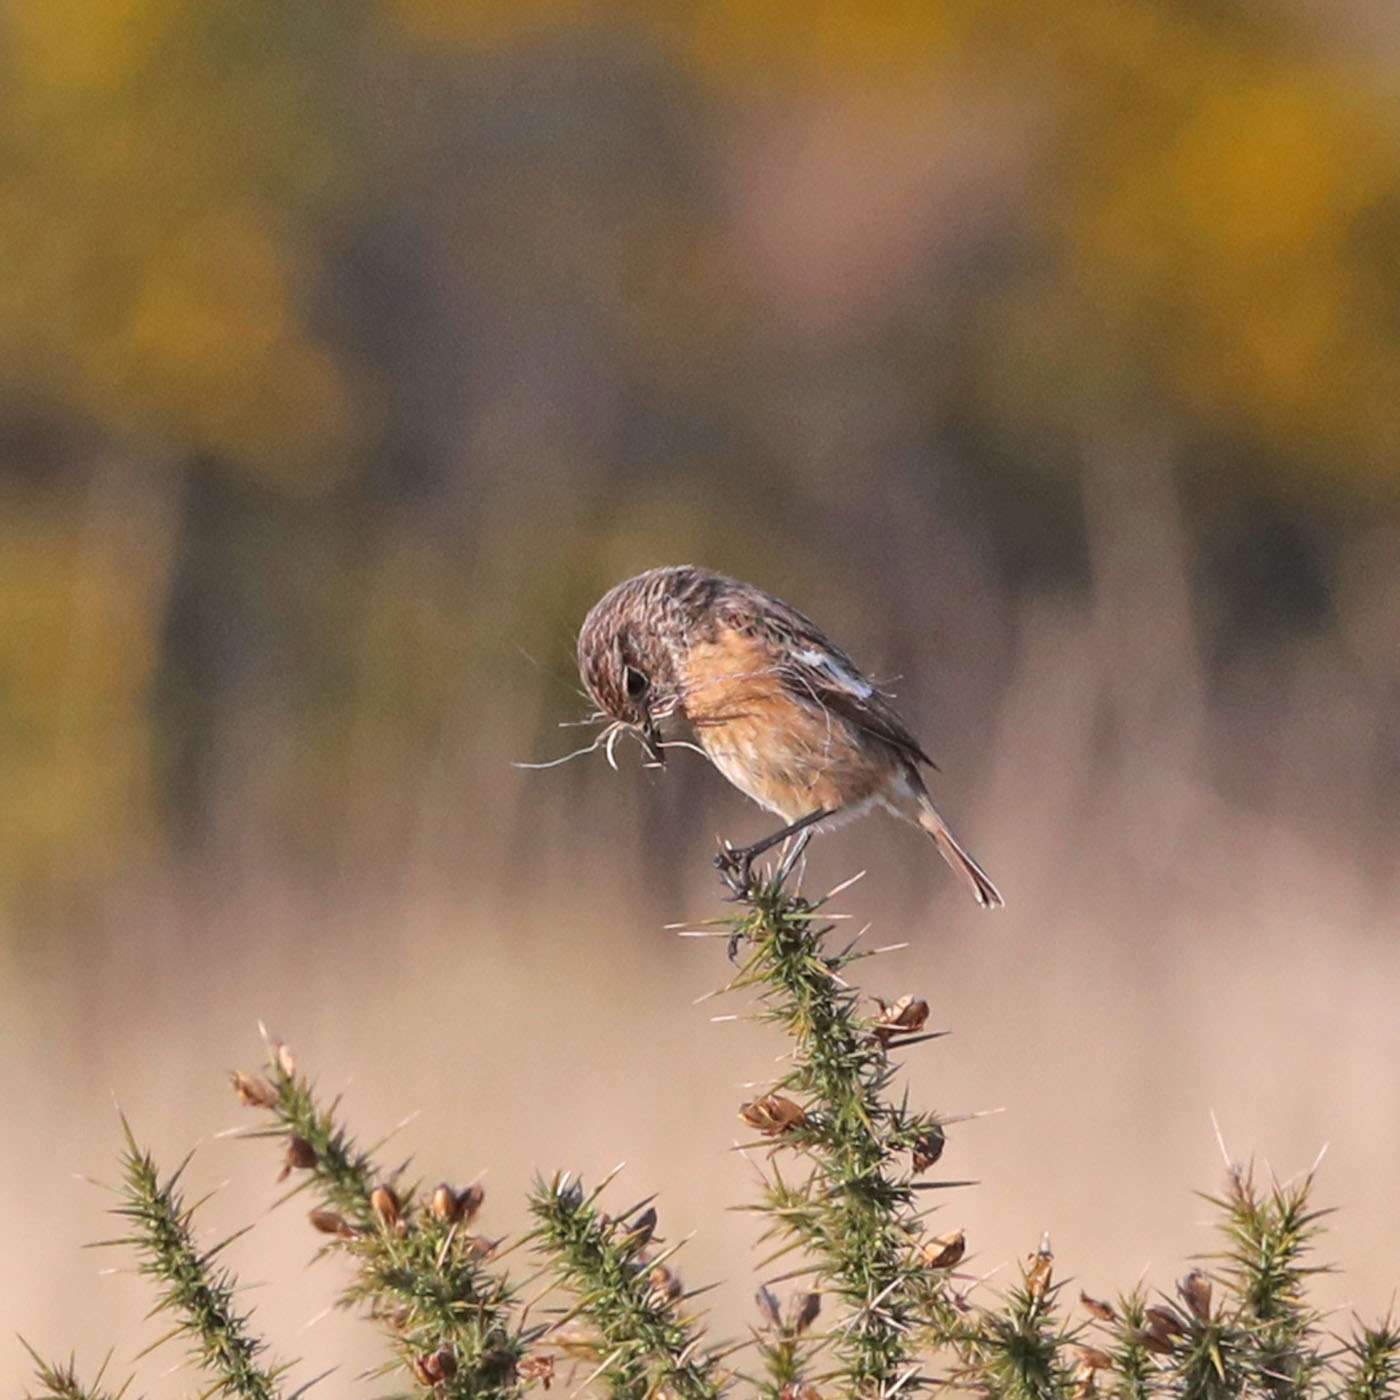 Stonechat by Steve Hopper at South Brent